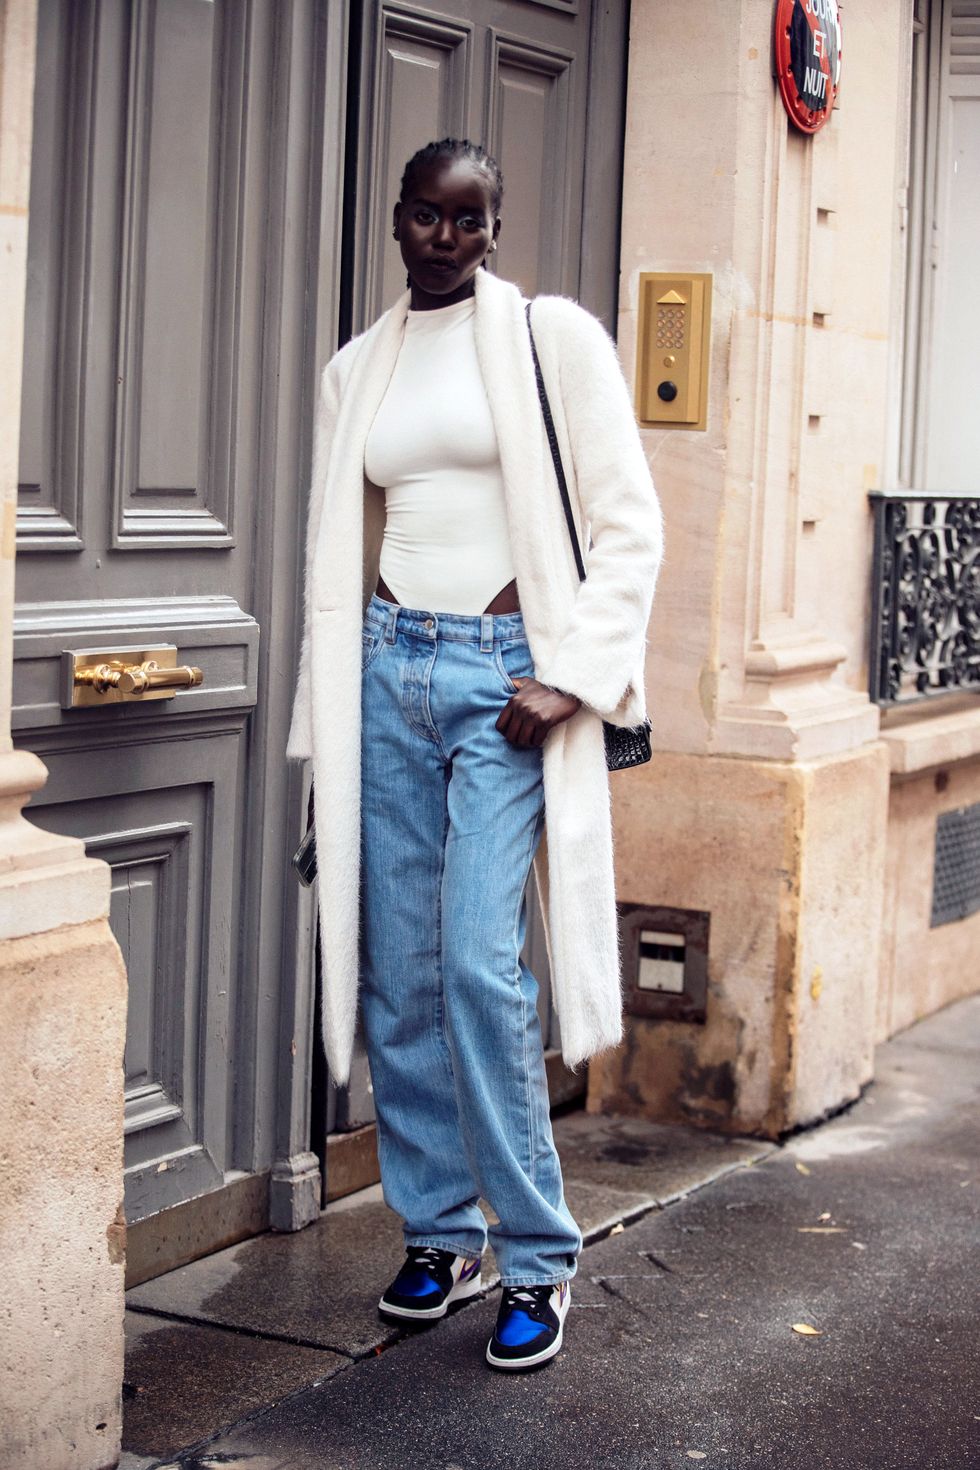 10 Best Outfit Ideas - Model Street Style Inspiration for Winter